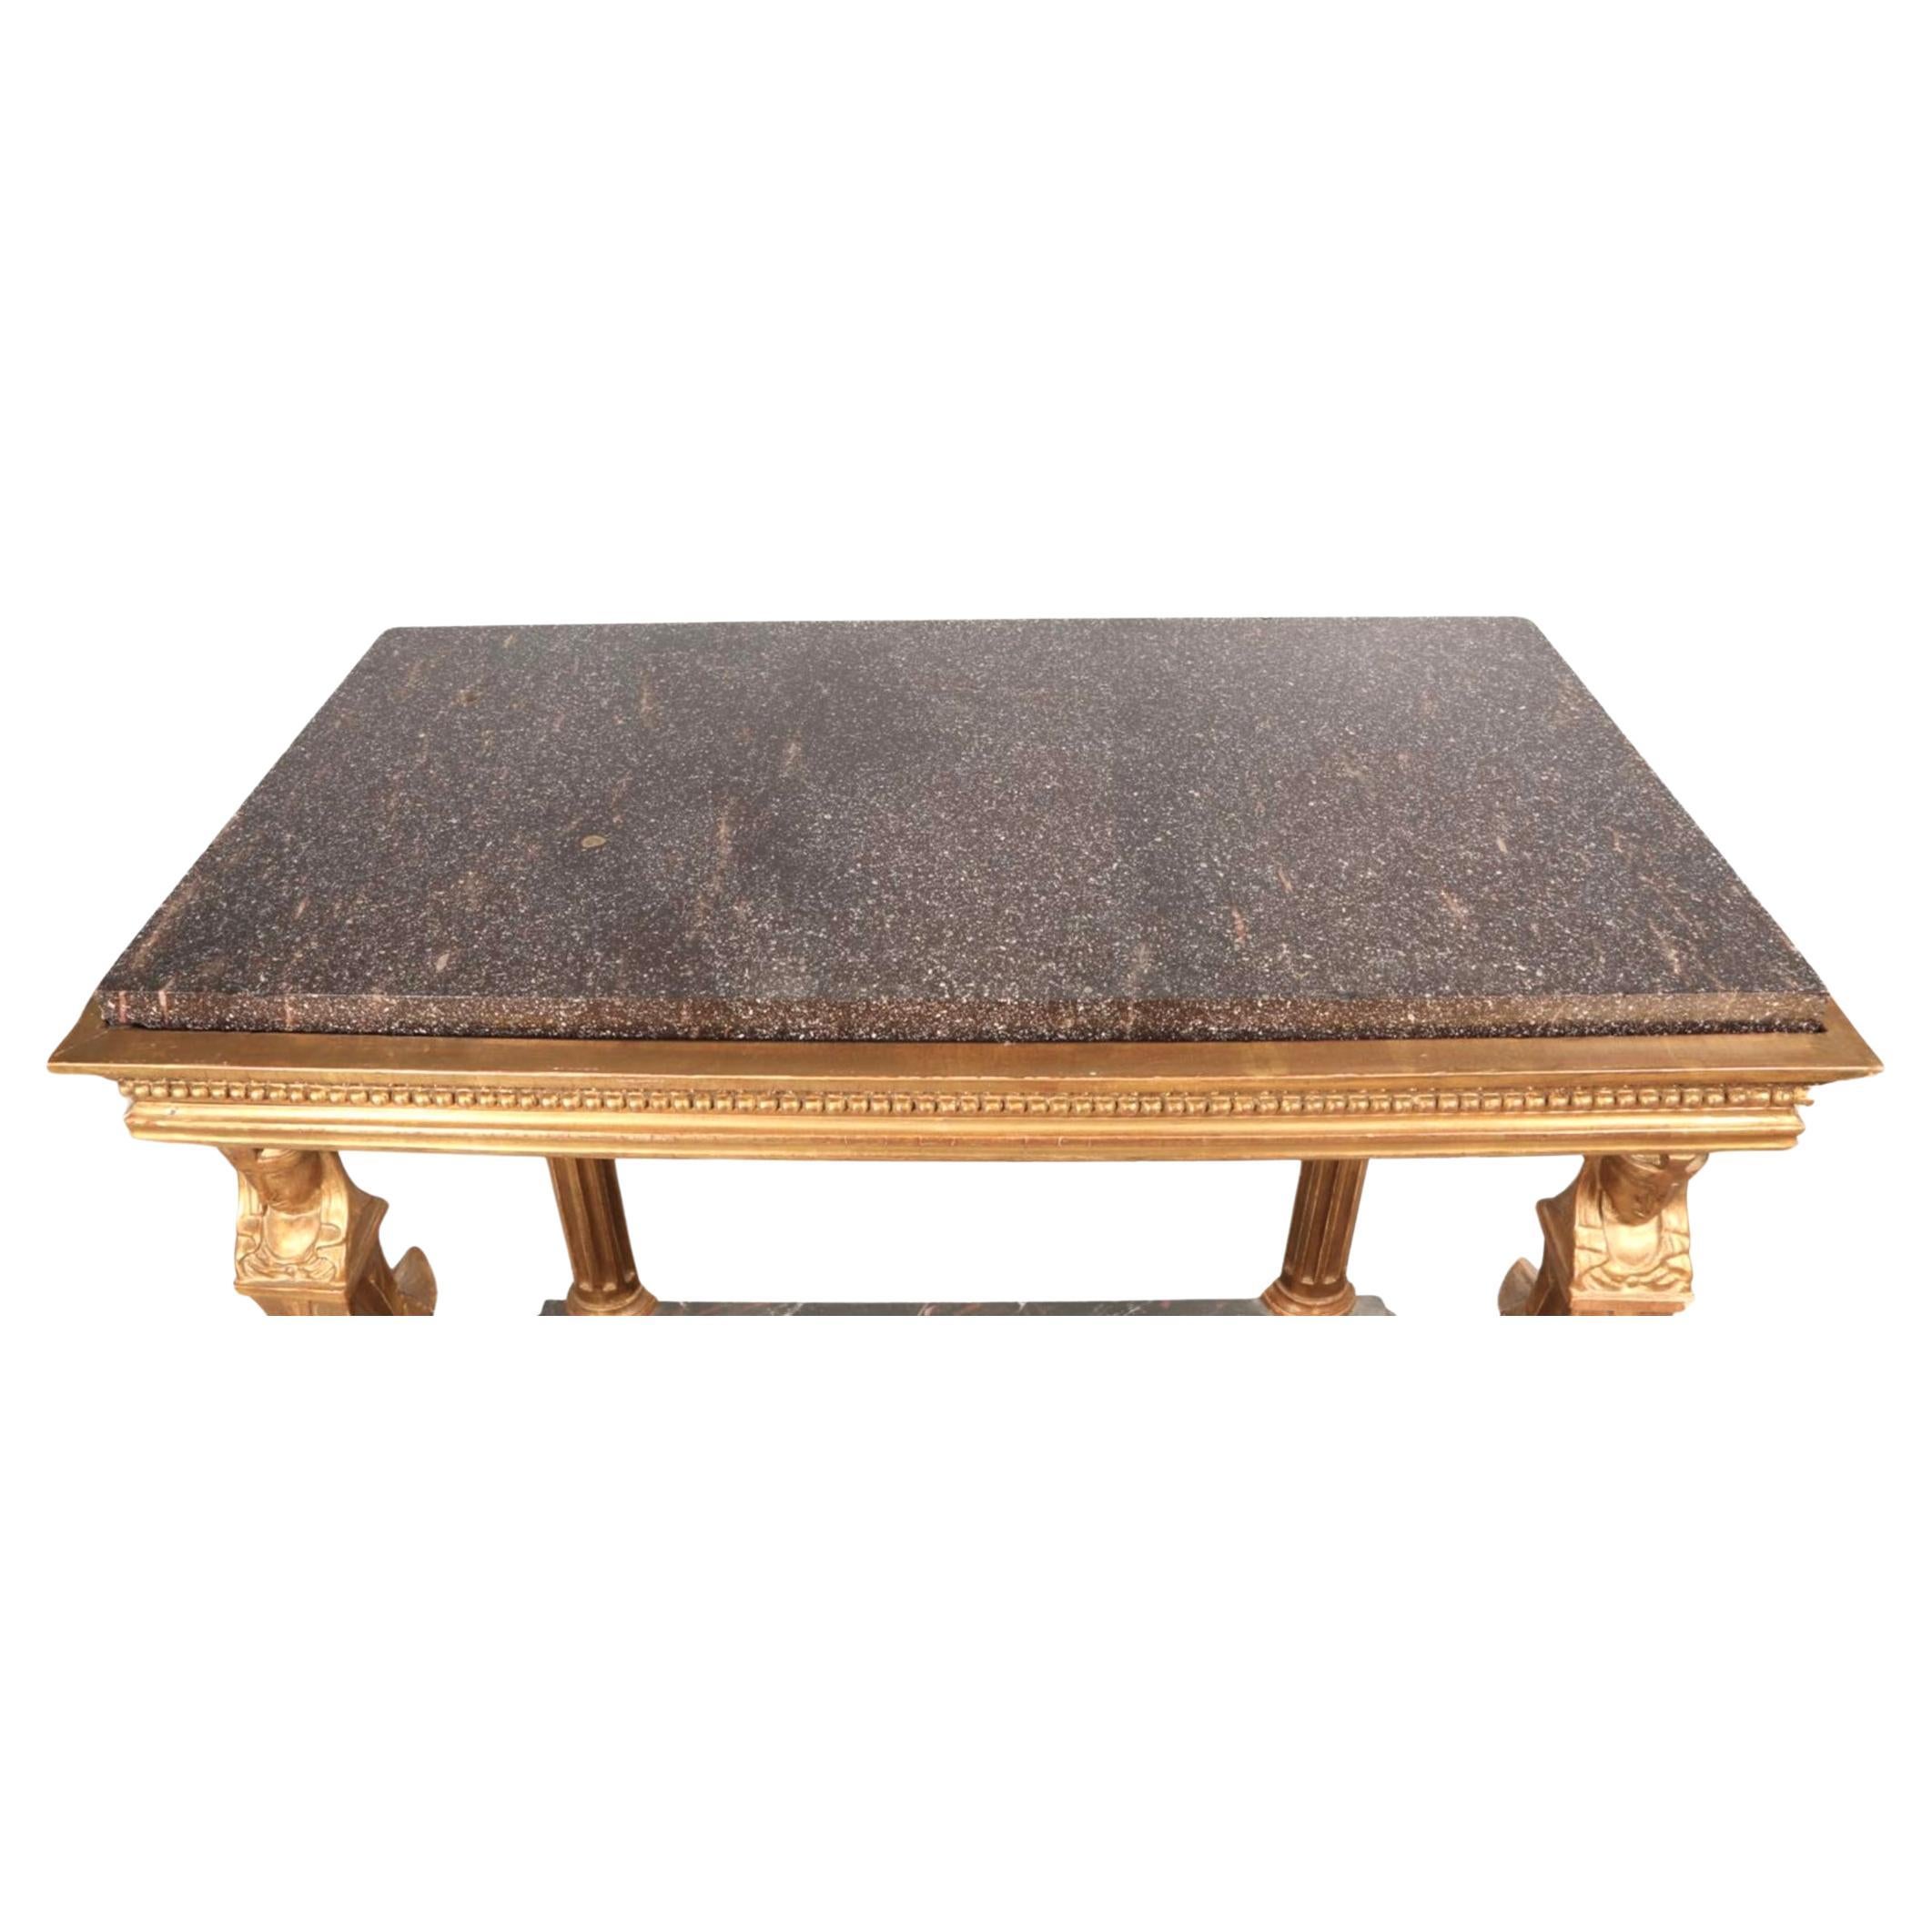 Swedish Neoclassical Giltwood Porphyry Top Console Table, Early 19th Century For Sale 4